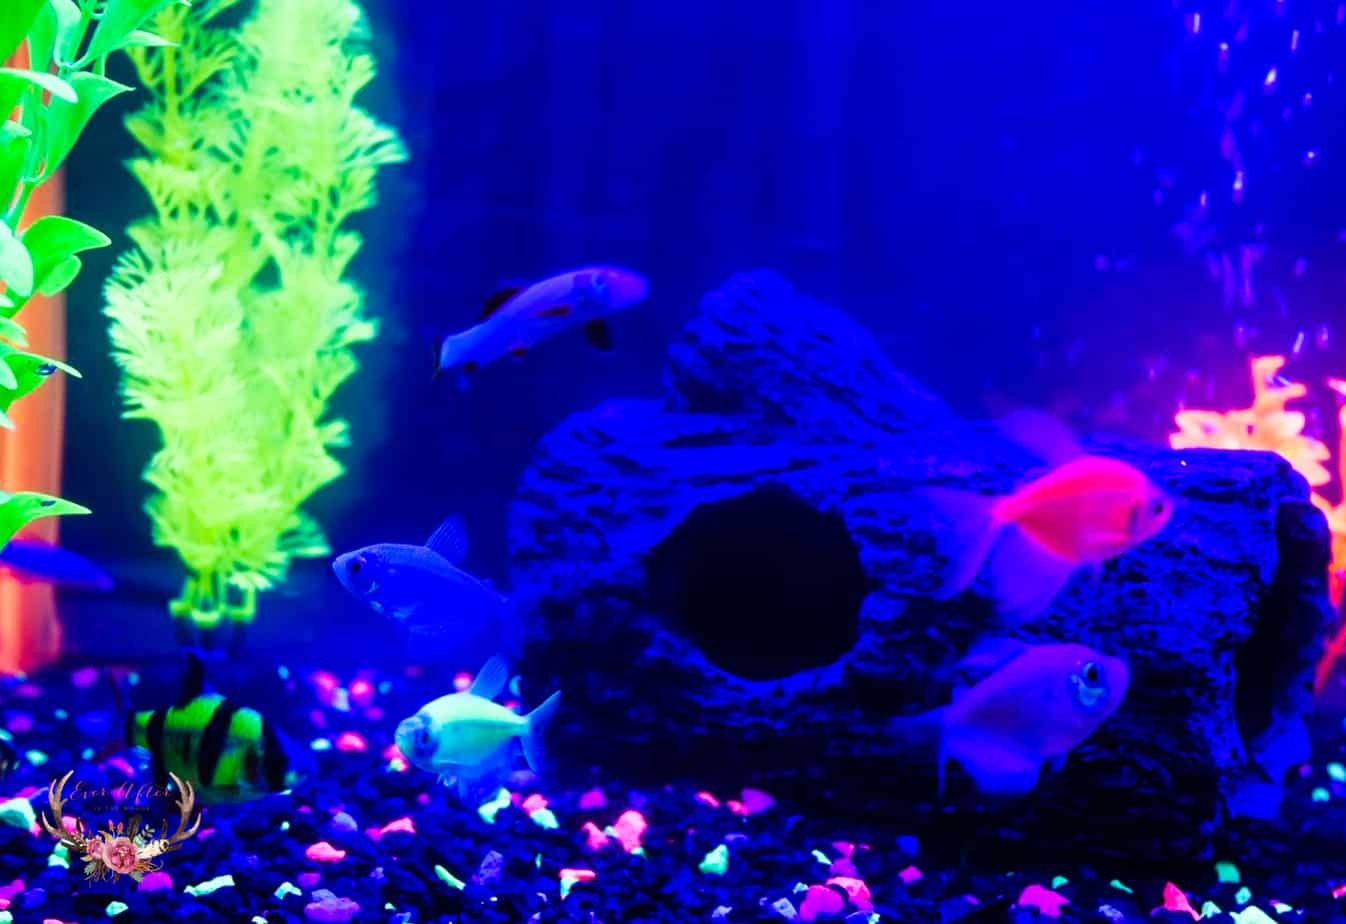 Beginners Guide to Setting Up your first Aquarium